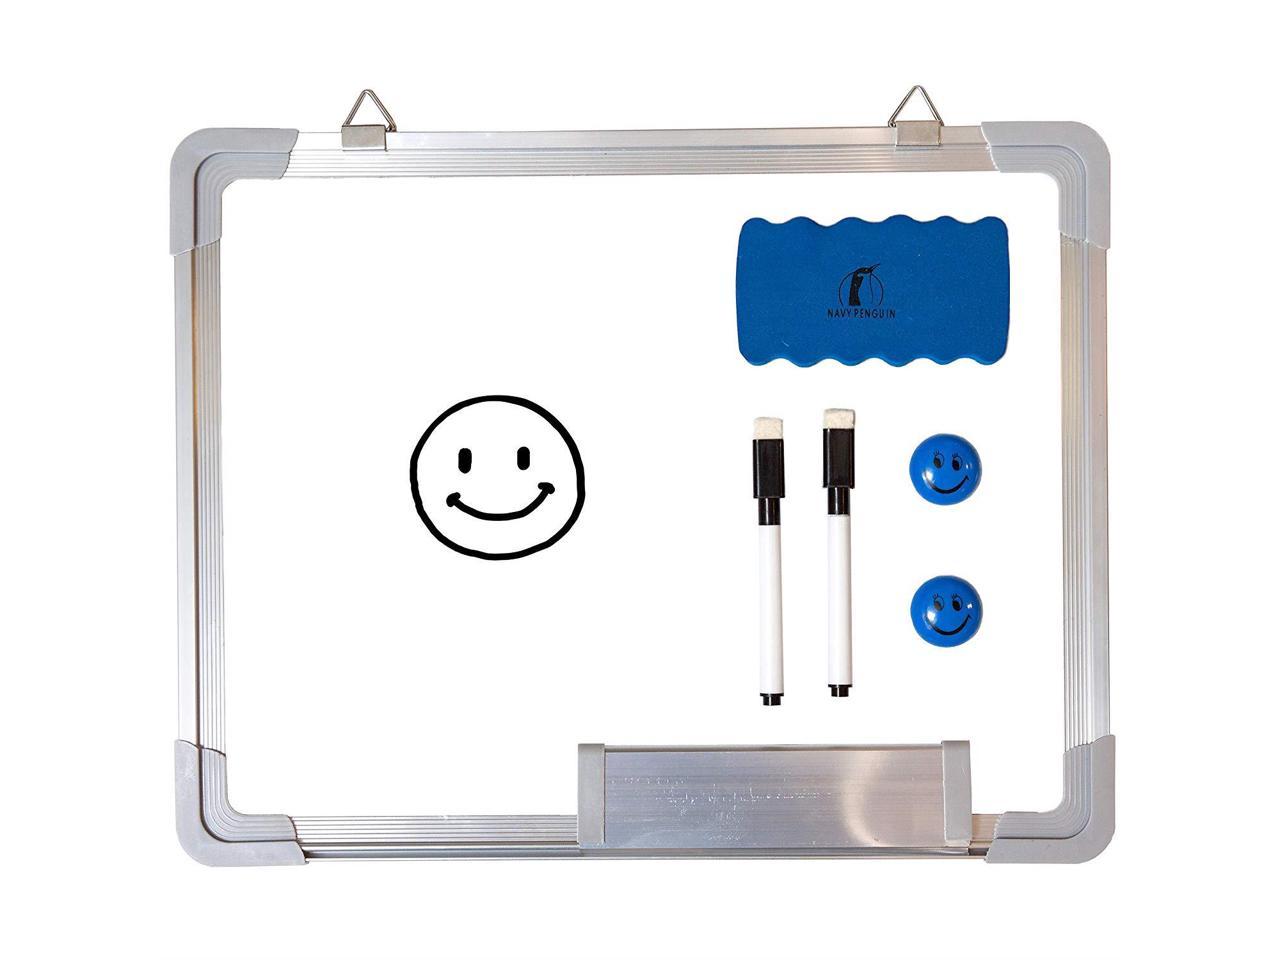 Dry Wipe Board 15 x 12 in with 1 Magnetic Eraser Whiteboard Set 4 Magnets and 6 Magnetic Labels Wall Hanging Reminder Kanban Scrum Dry Erase White Board for Home and Office